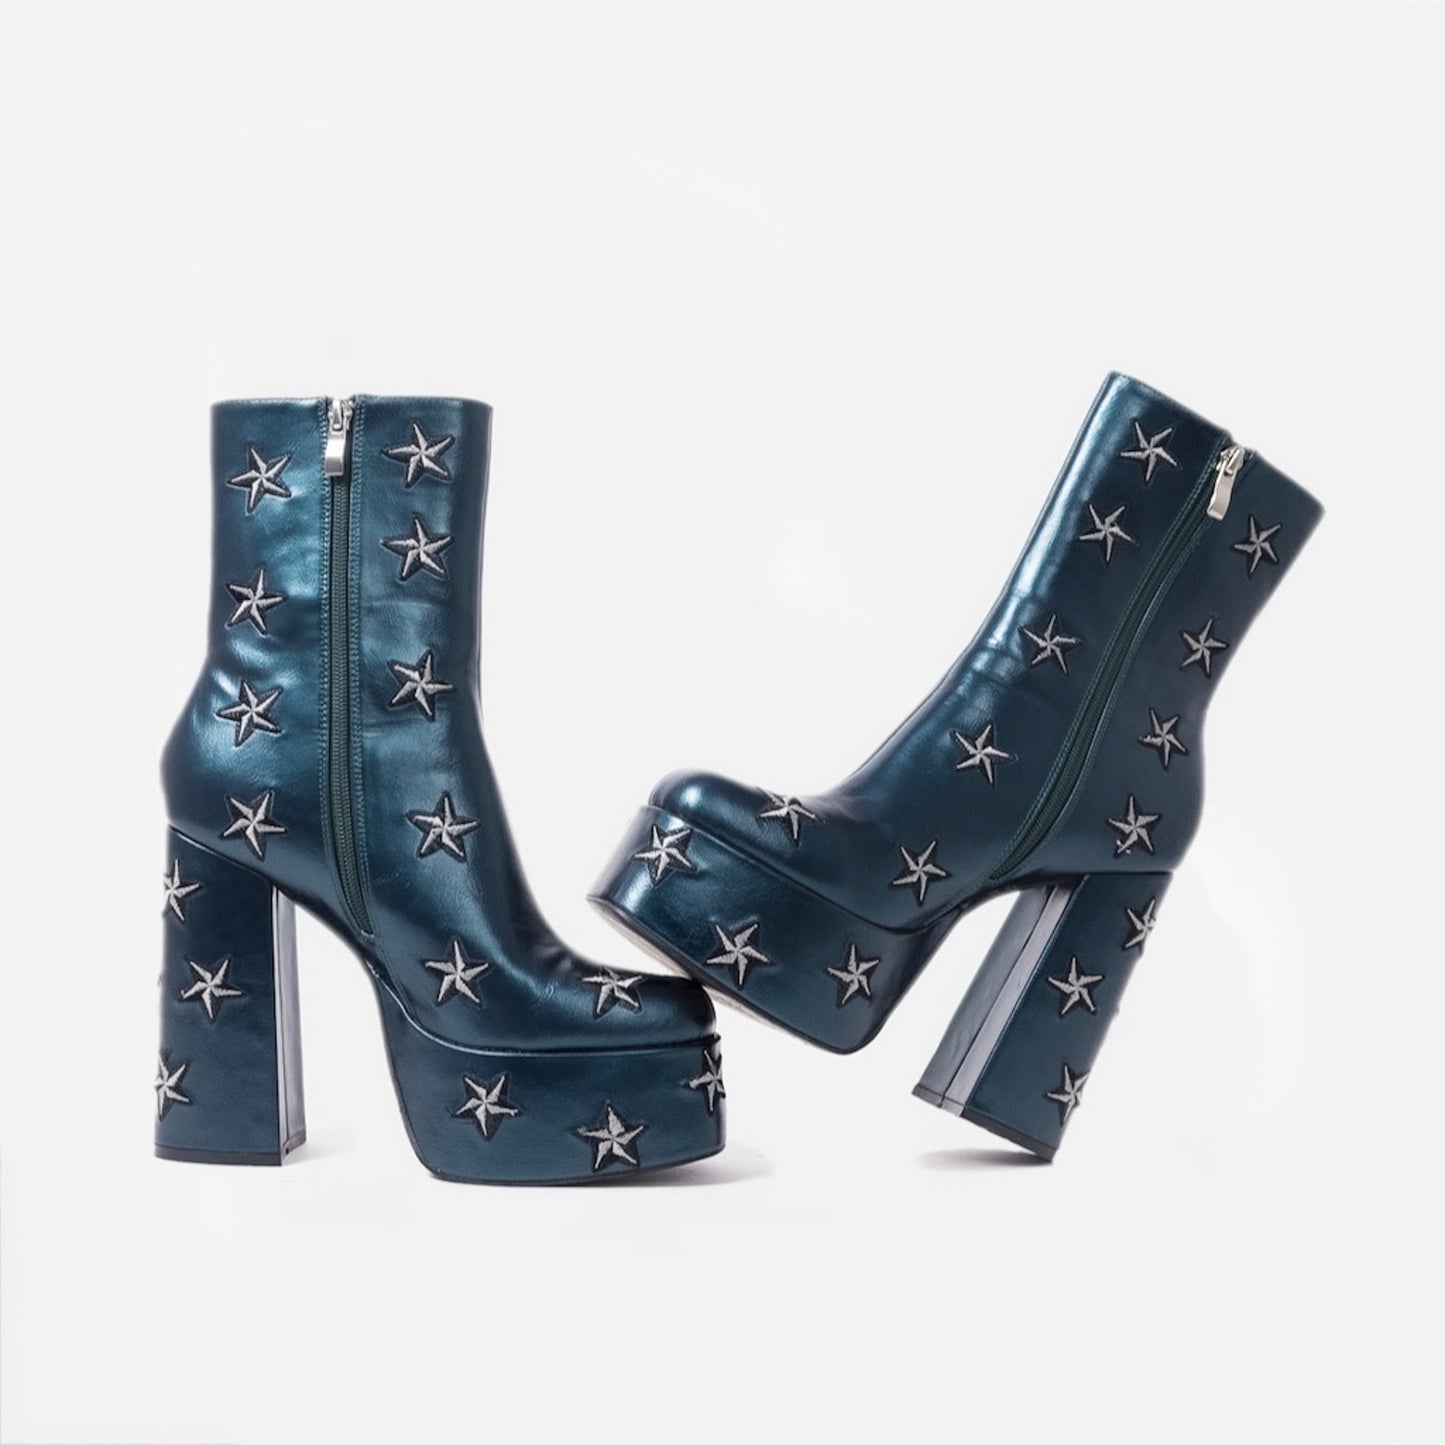 Dreams of Mooncraft Teal Heeled Boots - Ankle Boots - KOI Footwear - Blue - Zip Detail